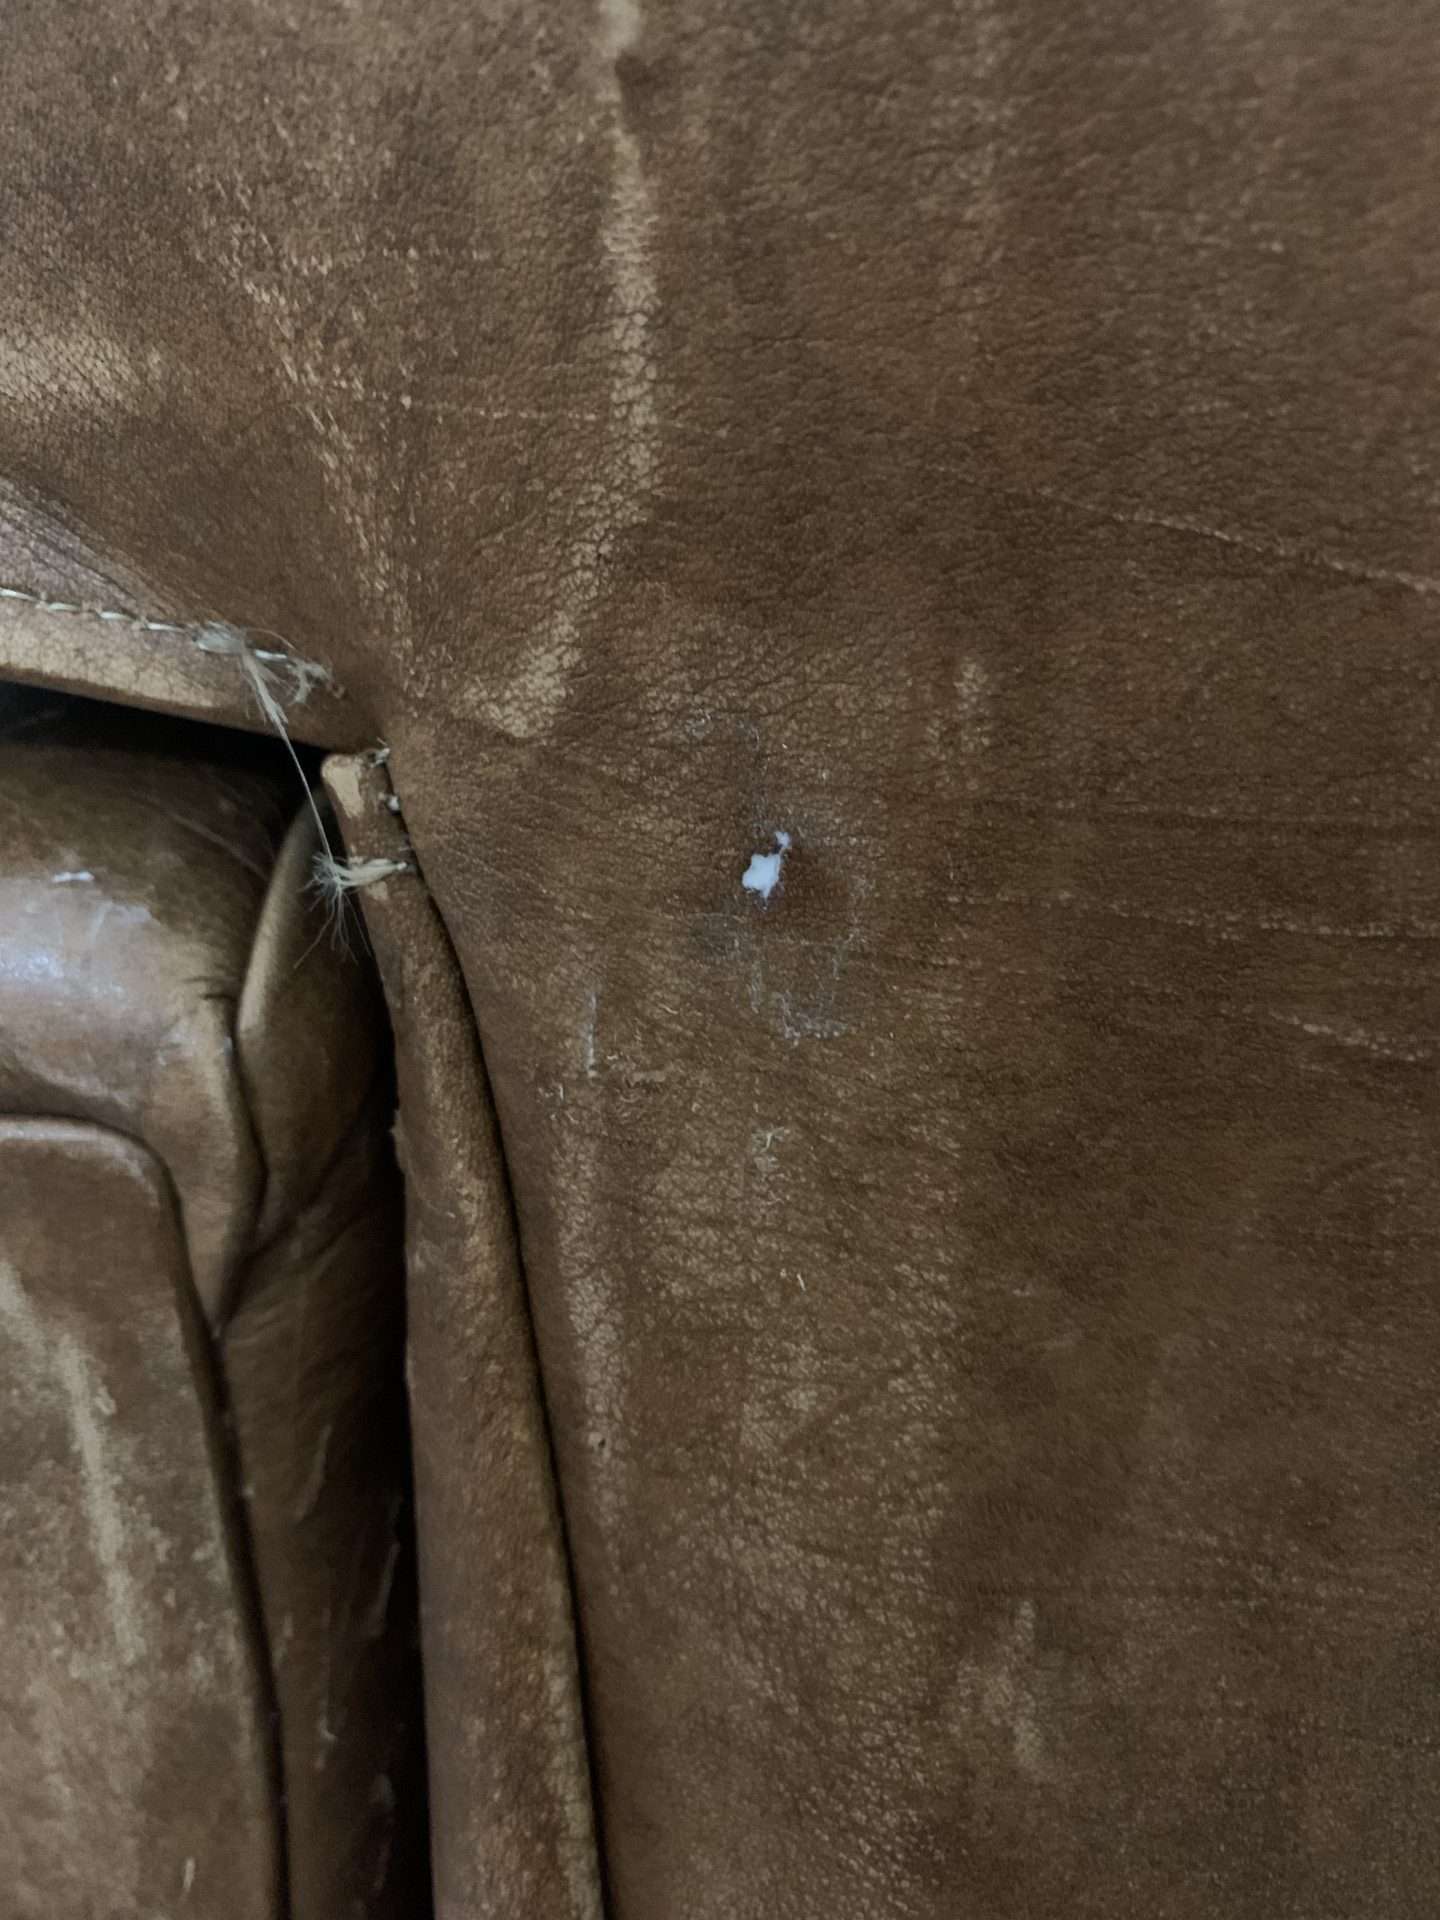 Filling in a hole in a leather chair.